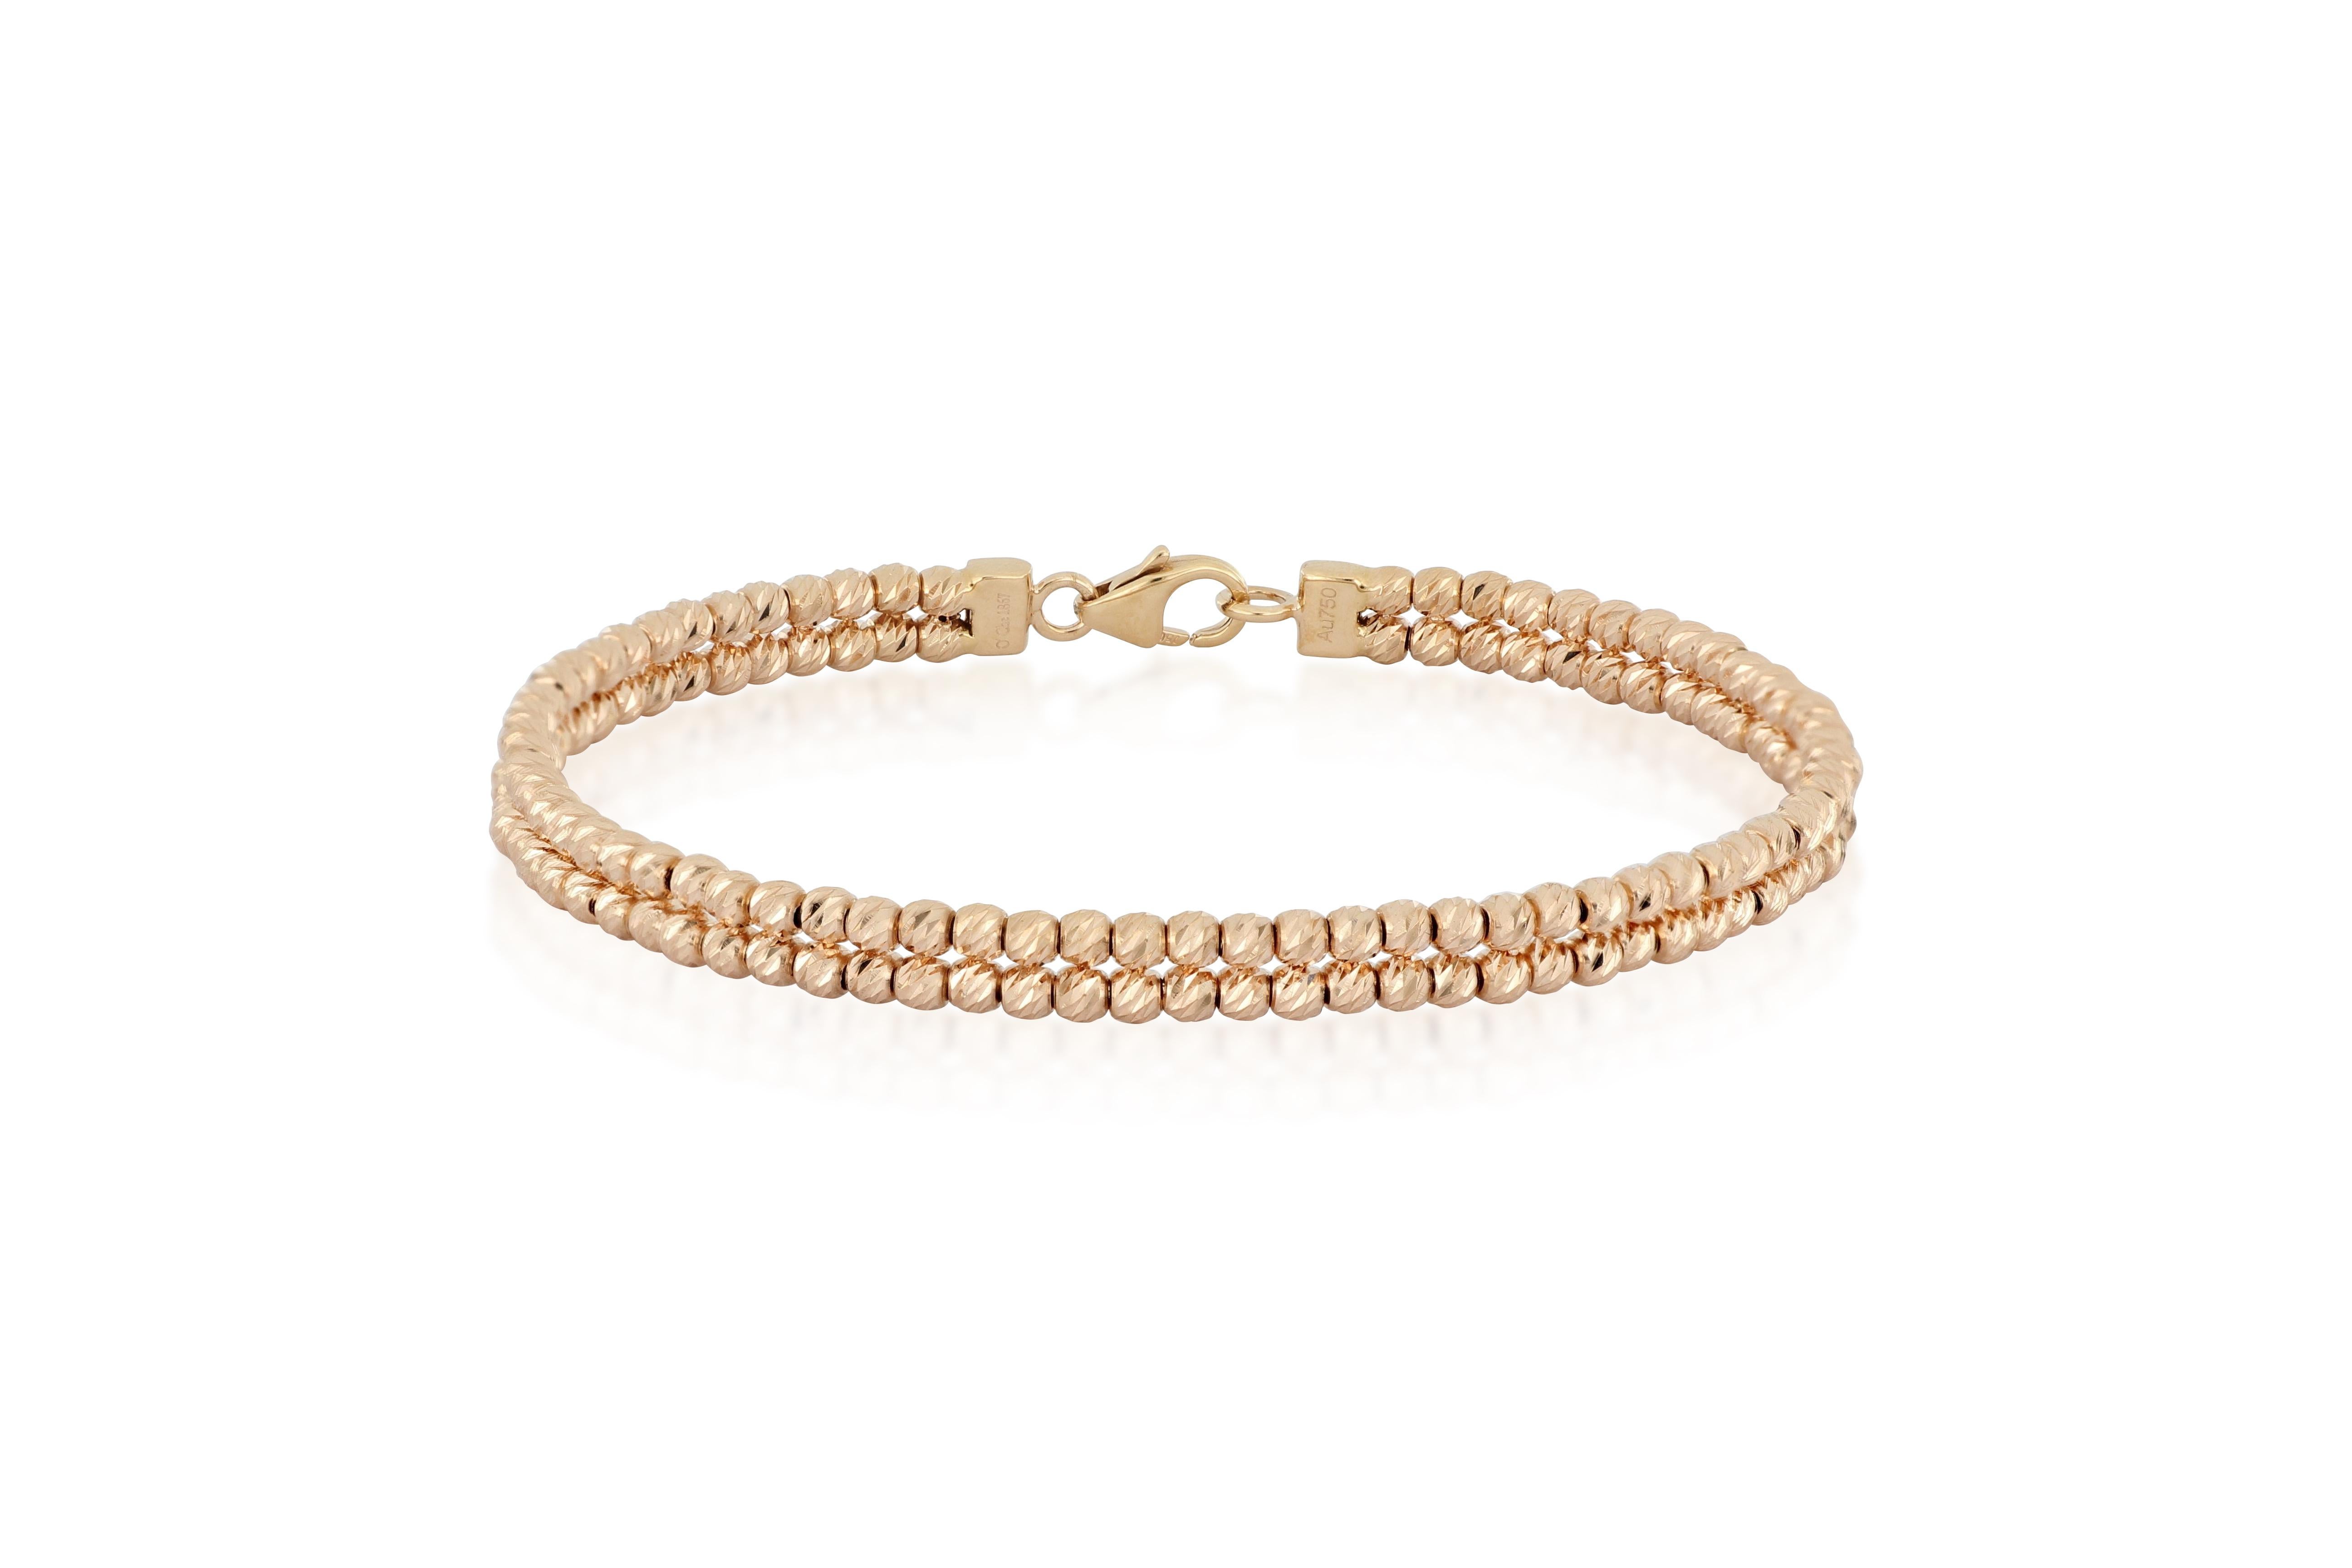 Contemporary 18 Karat Rose Gold Bangle with Sparkling Diamond-cut Beads For Sale